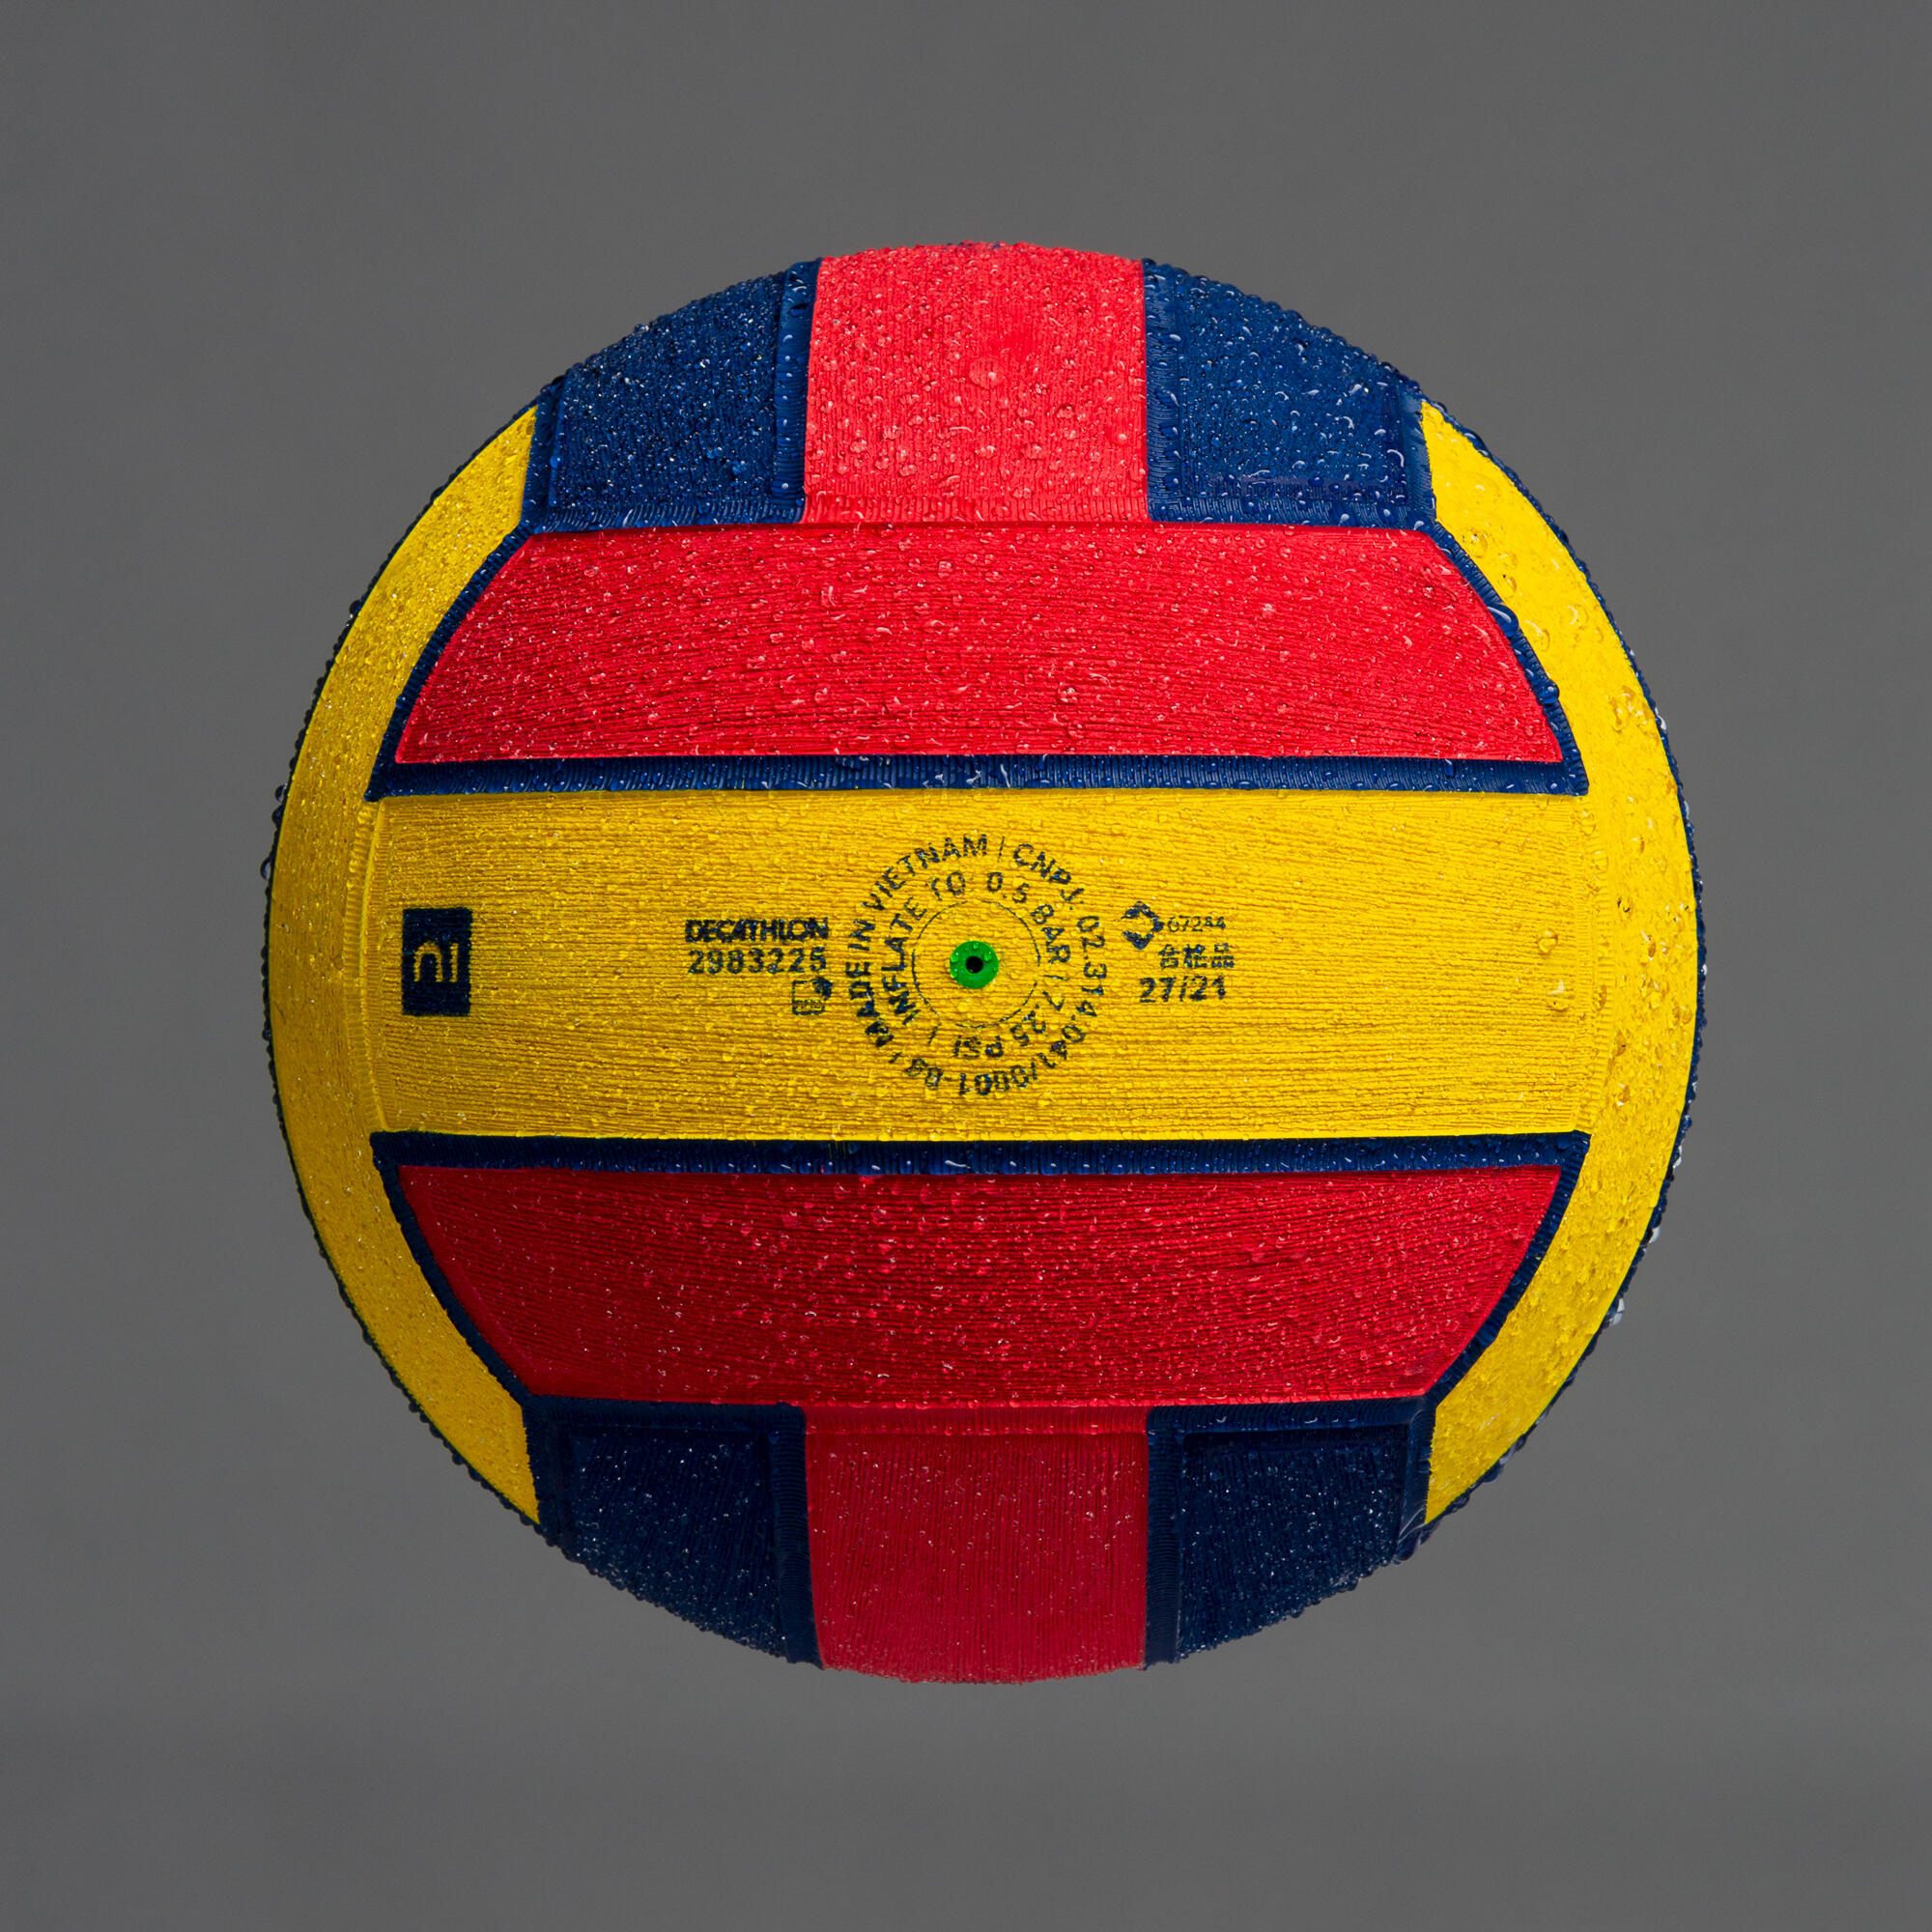 WATER POLO BALL WP900 SIZE 5 4/5